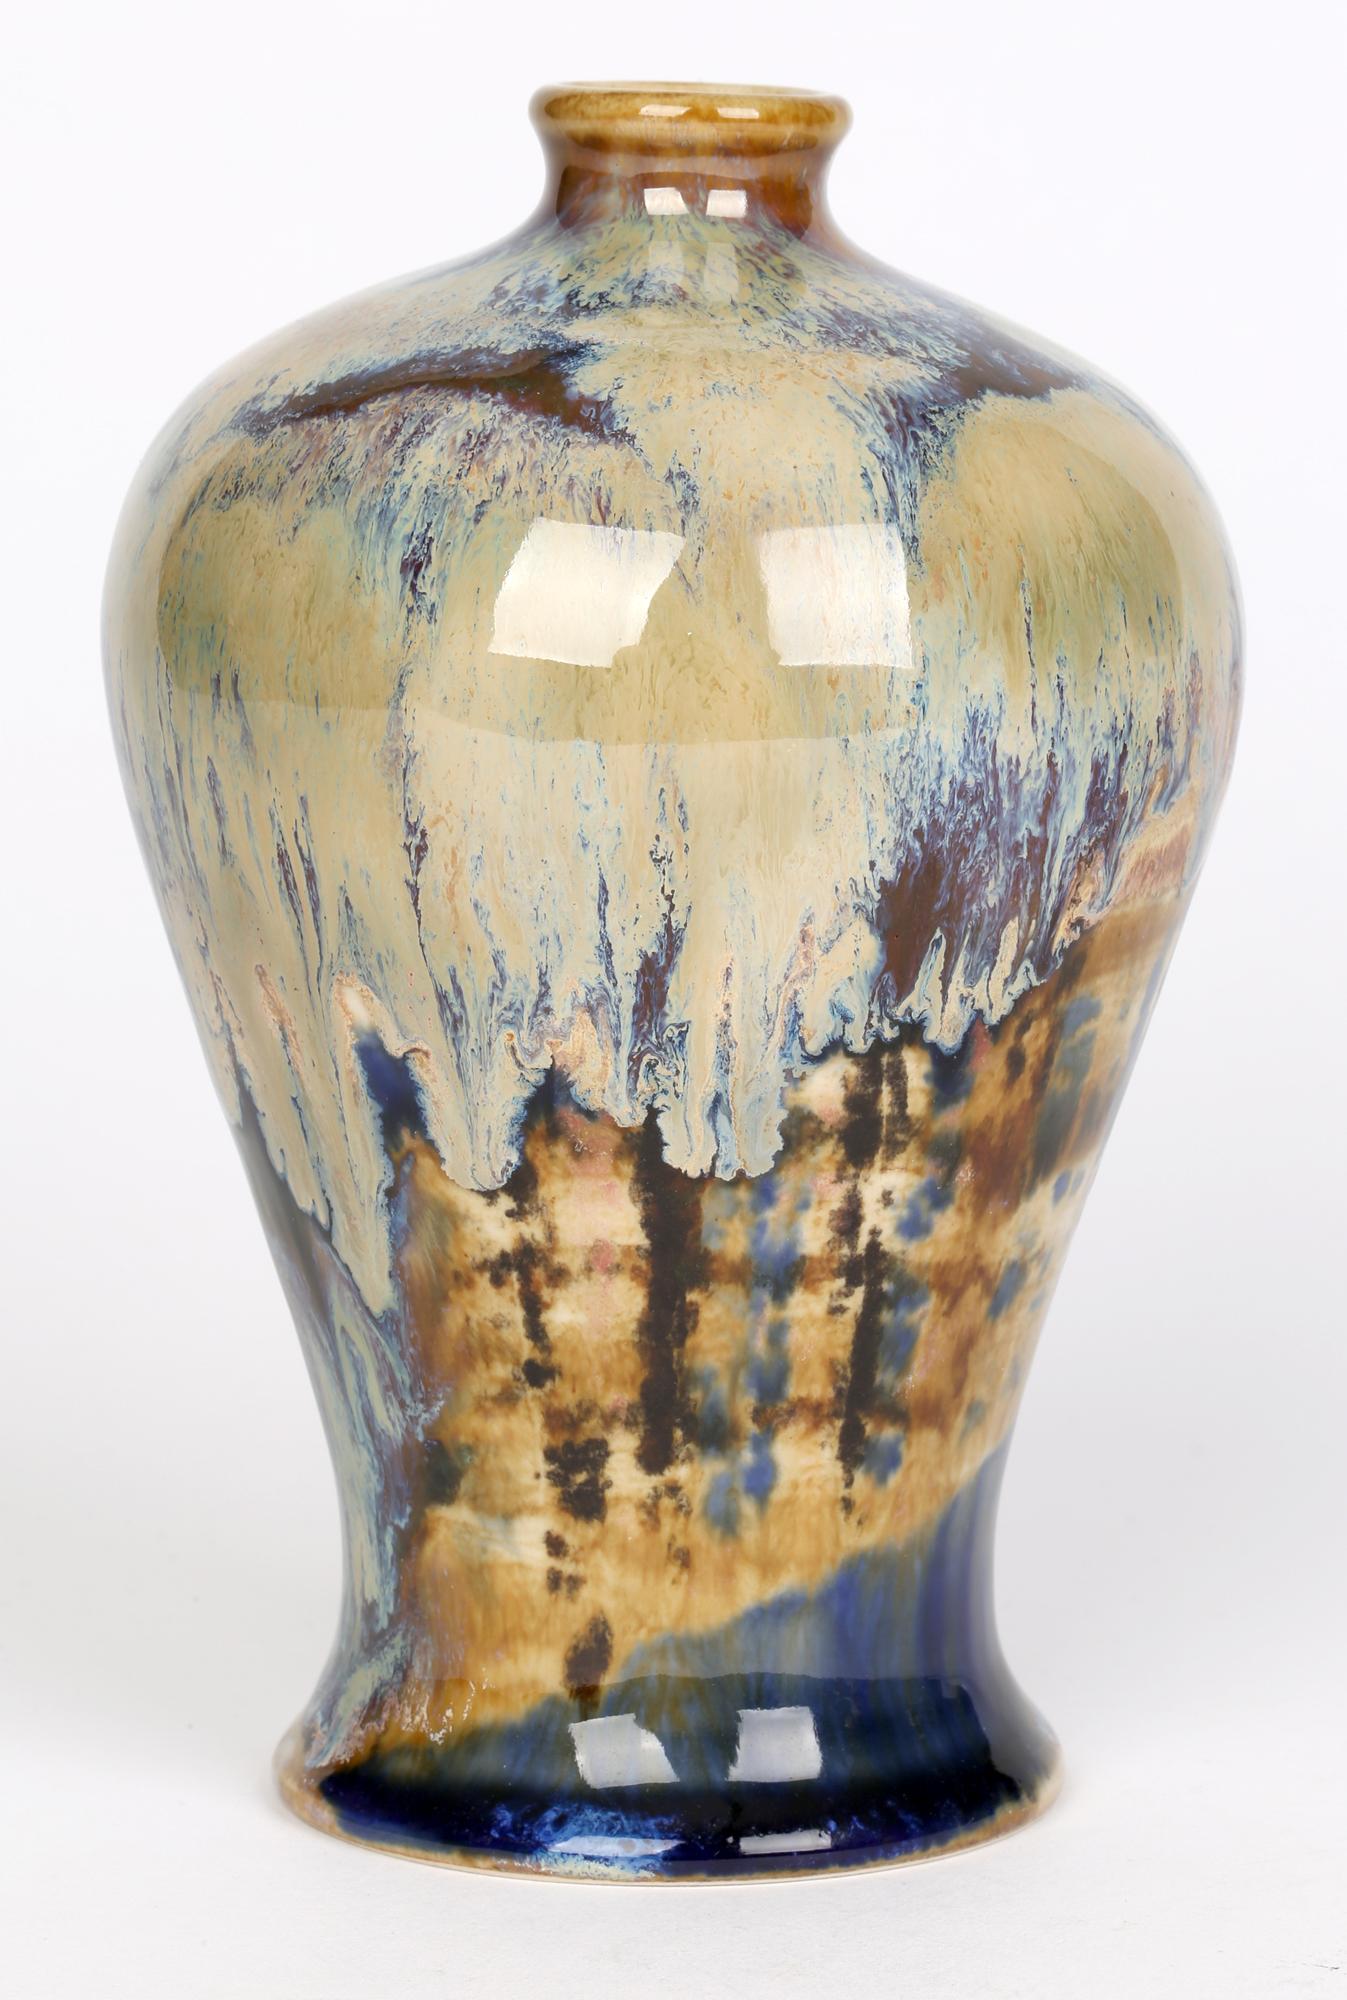 Superb high fired Cobridge trial art pottery Baluster vase designed by Andrew Hull and dated 2004. The heavily made stoneware vase is of baluster shape with a skirted lower body and narrow rounded foot and with a narrow raised neck and top. The body